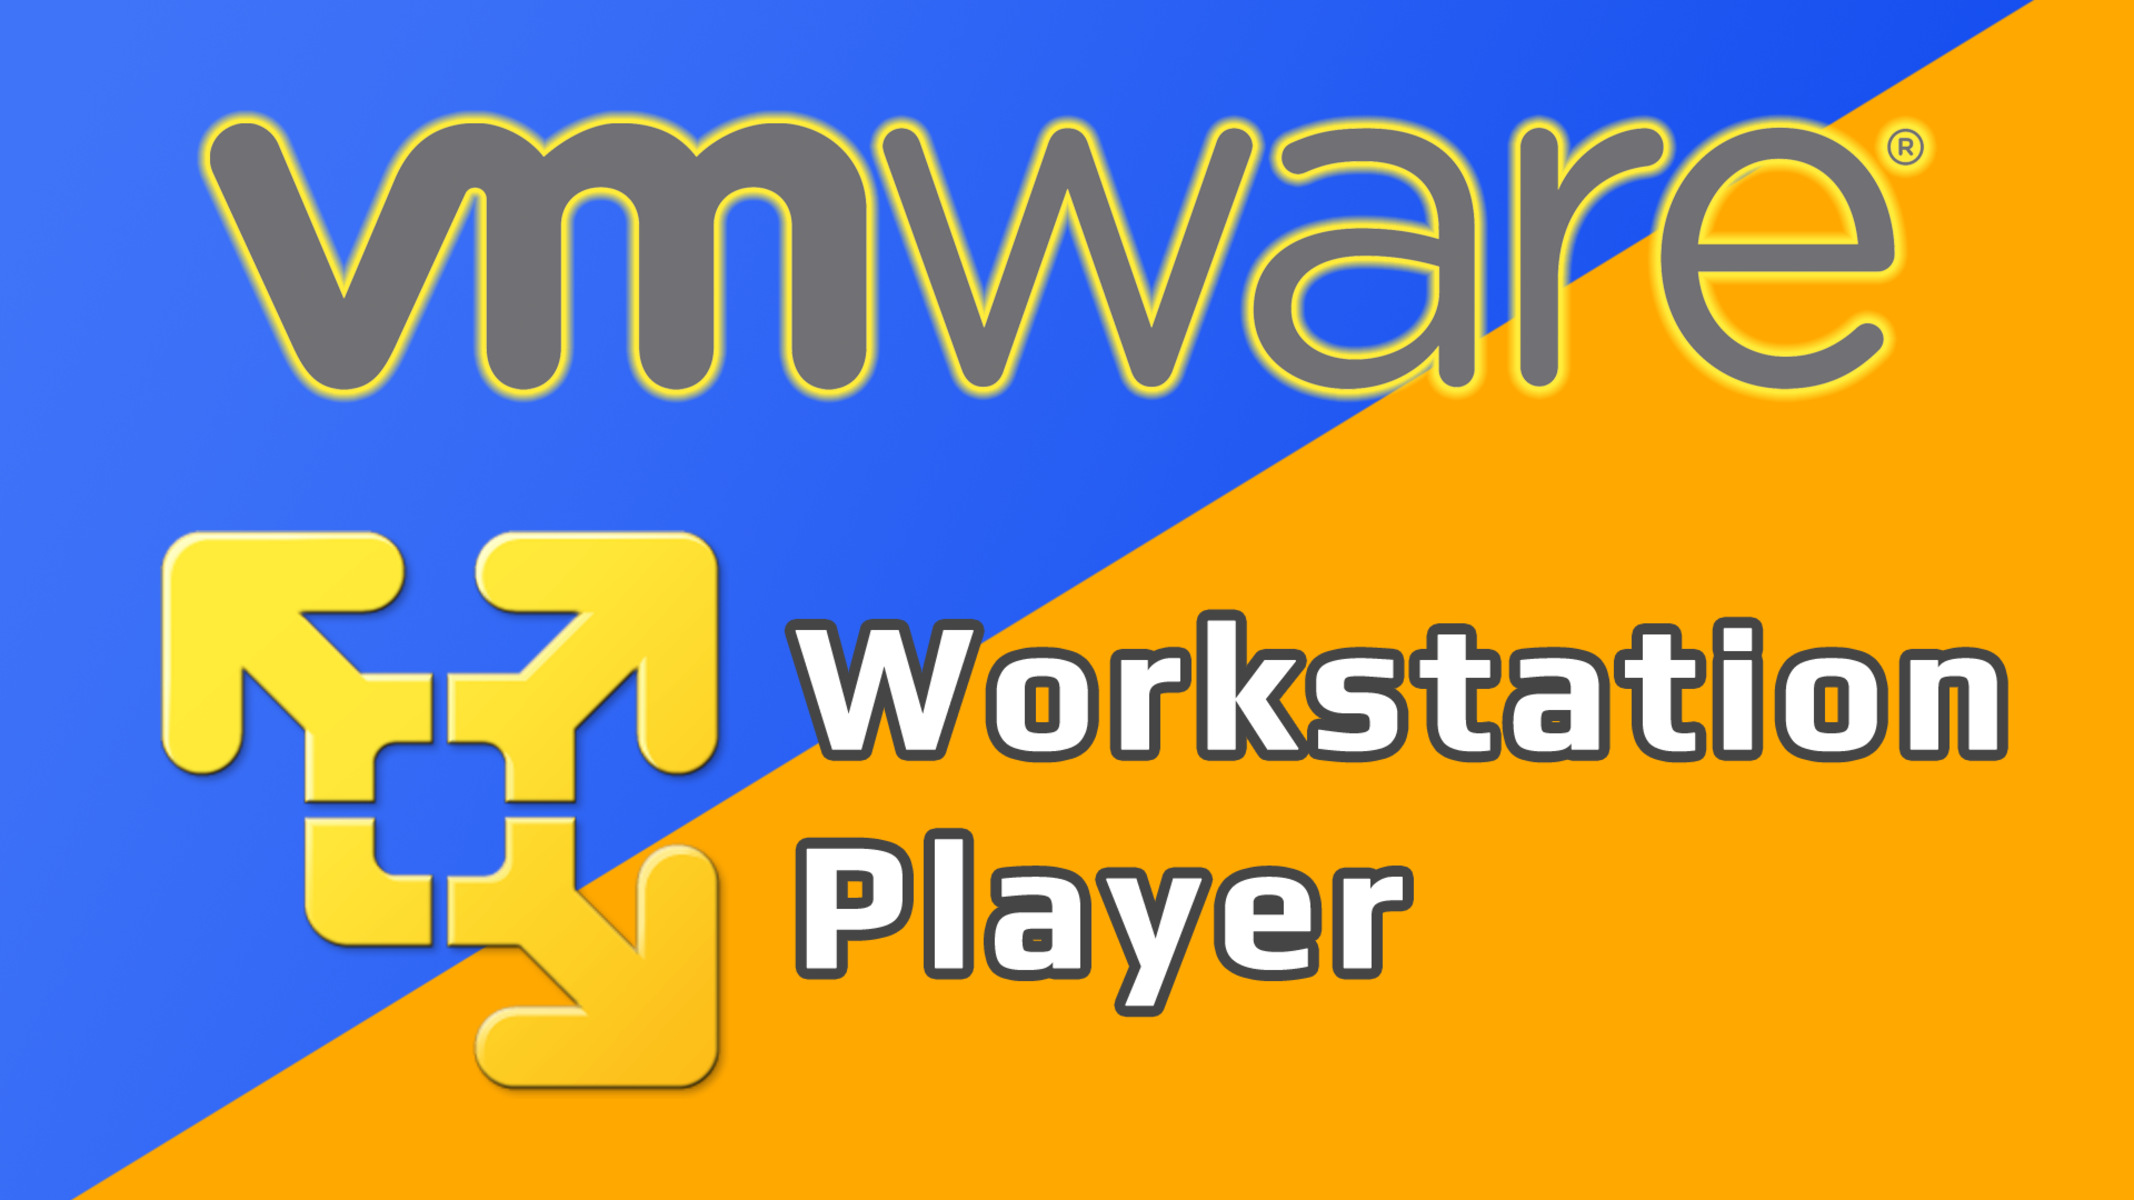 How To Create A Virtual Machine Using VMware Workstation 12 Player